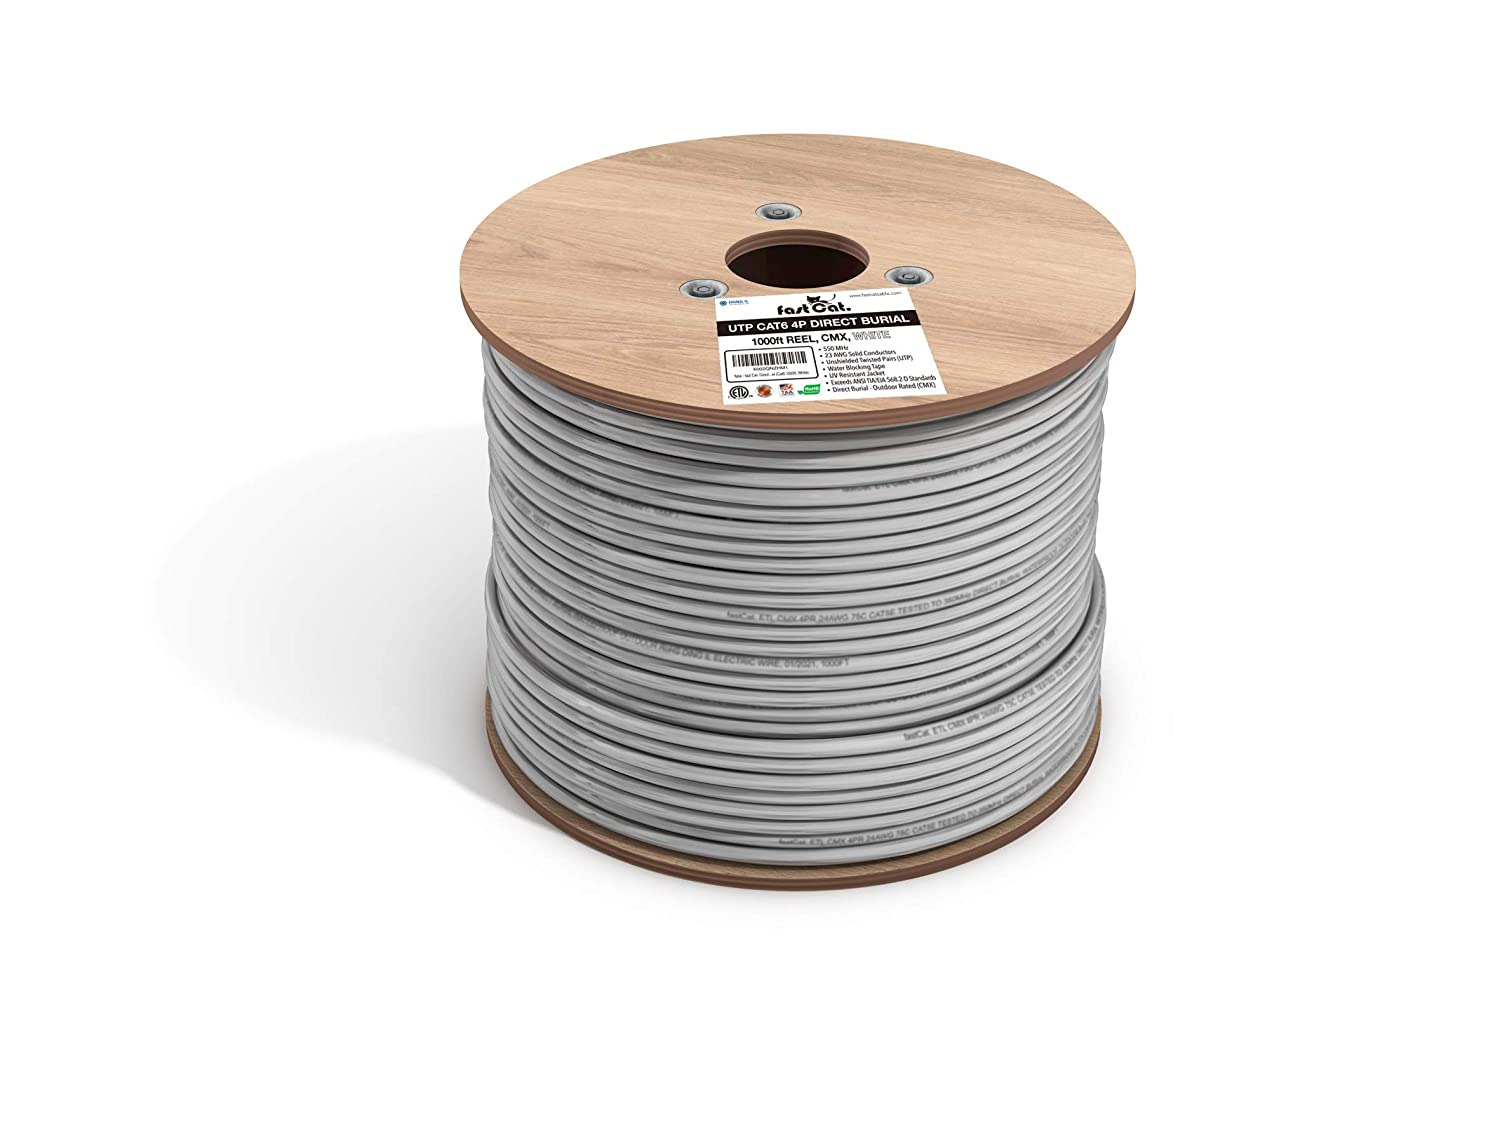 Fast Cat. Cat6 Direct Burial Outdoor Ethernet Cable - 1000Ft Waterproof Cat6 Cab